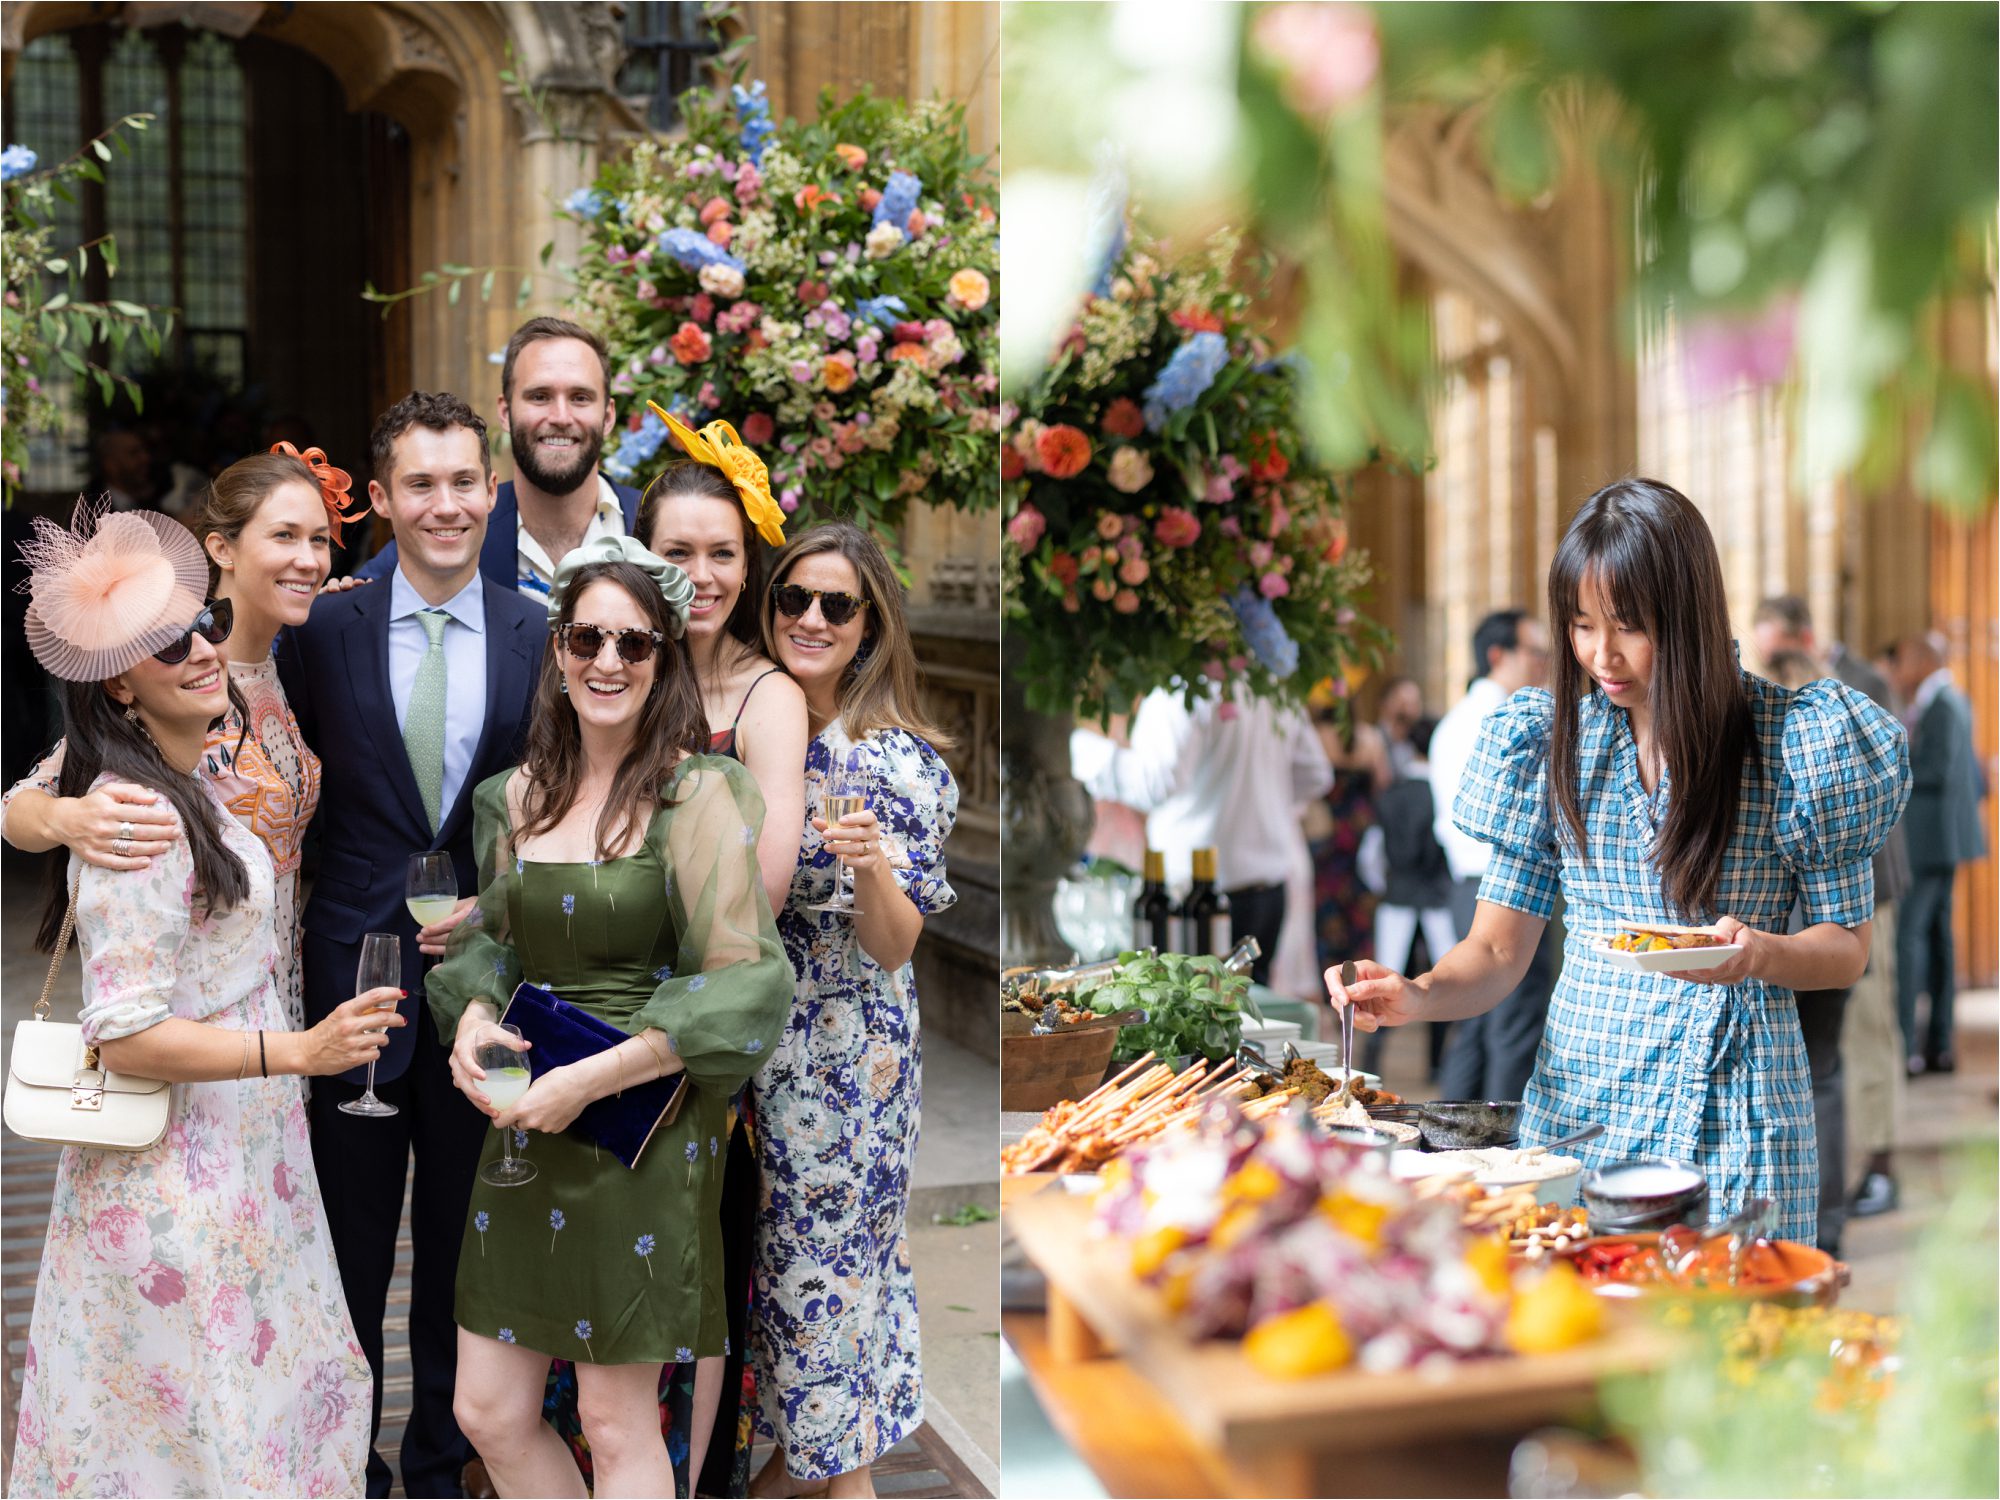 Destination wedding at The Bodleian Library